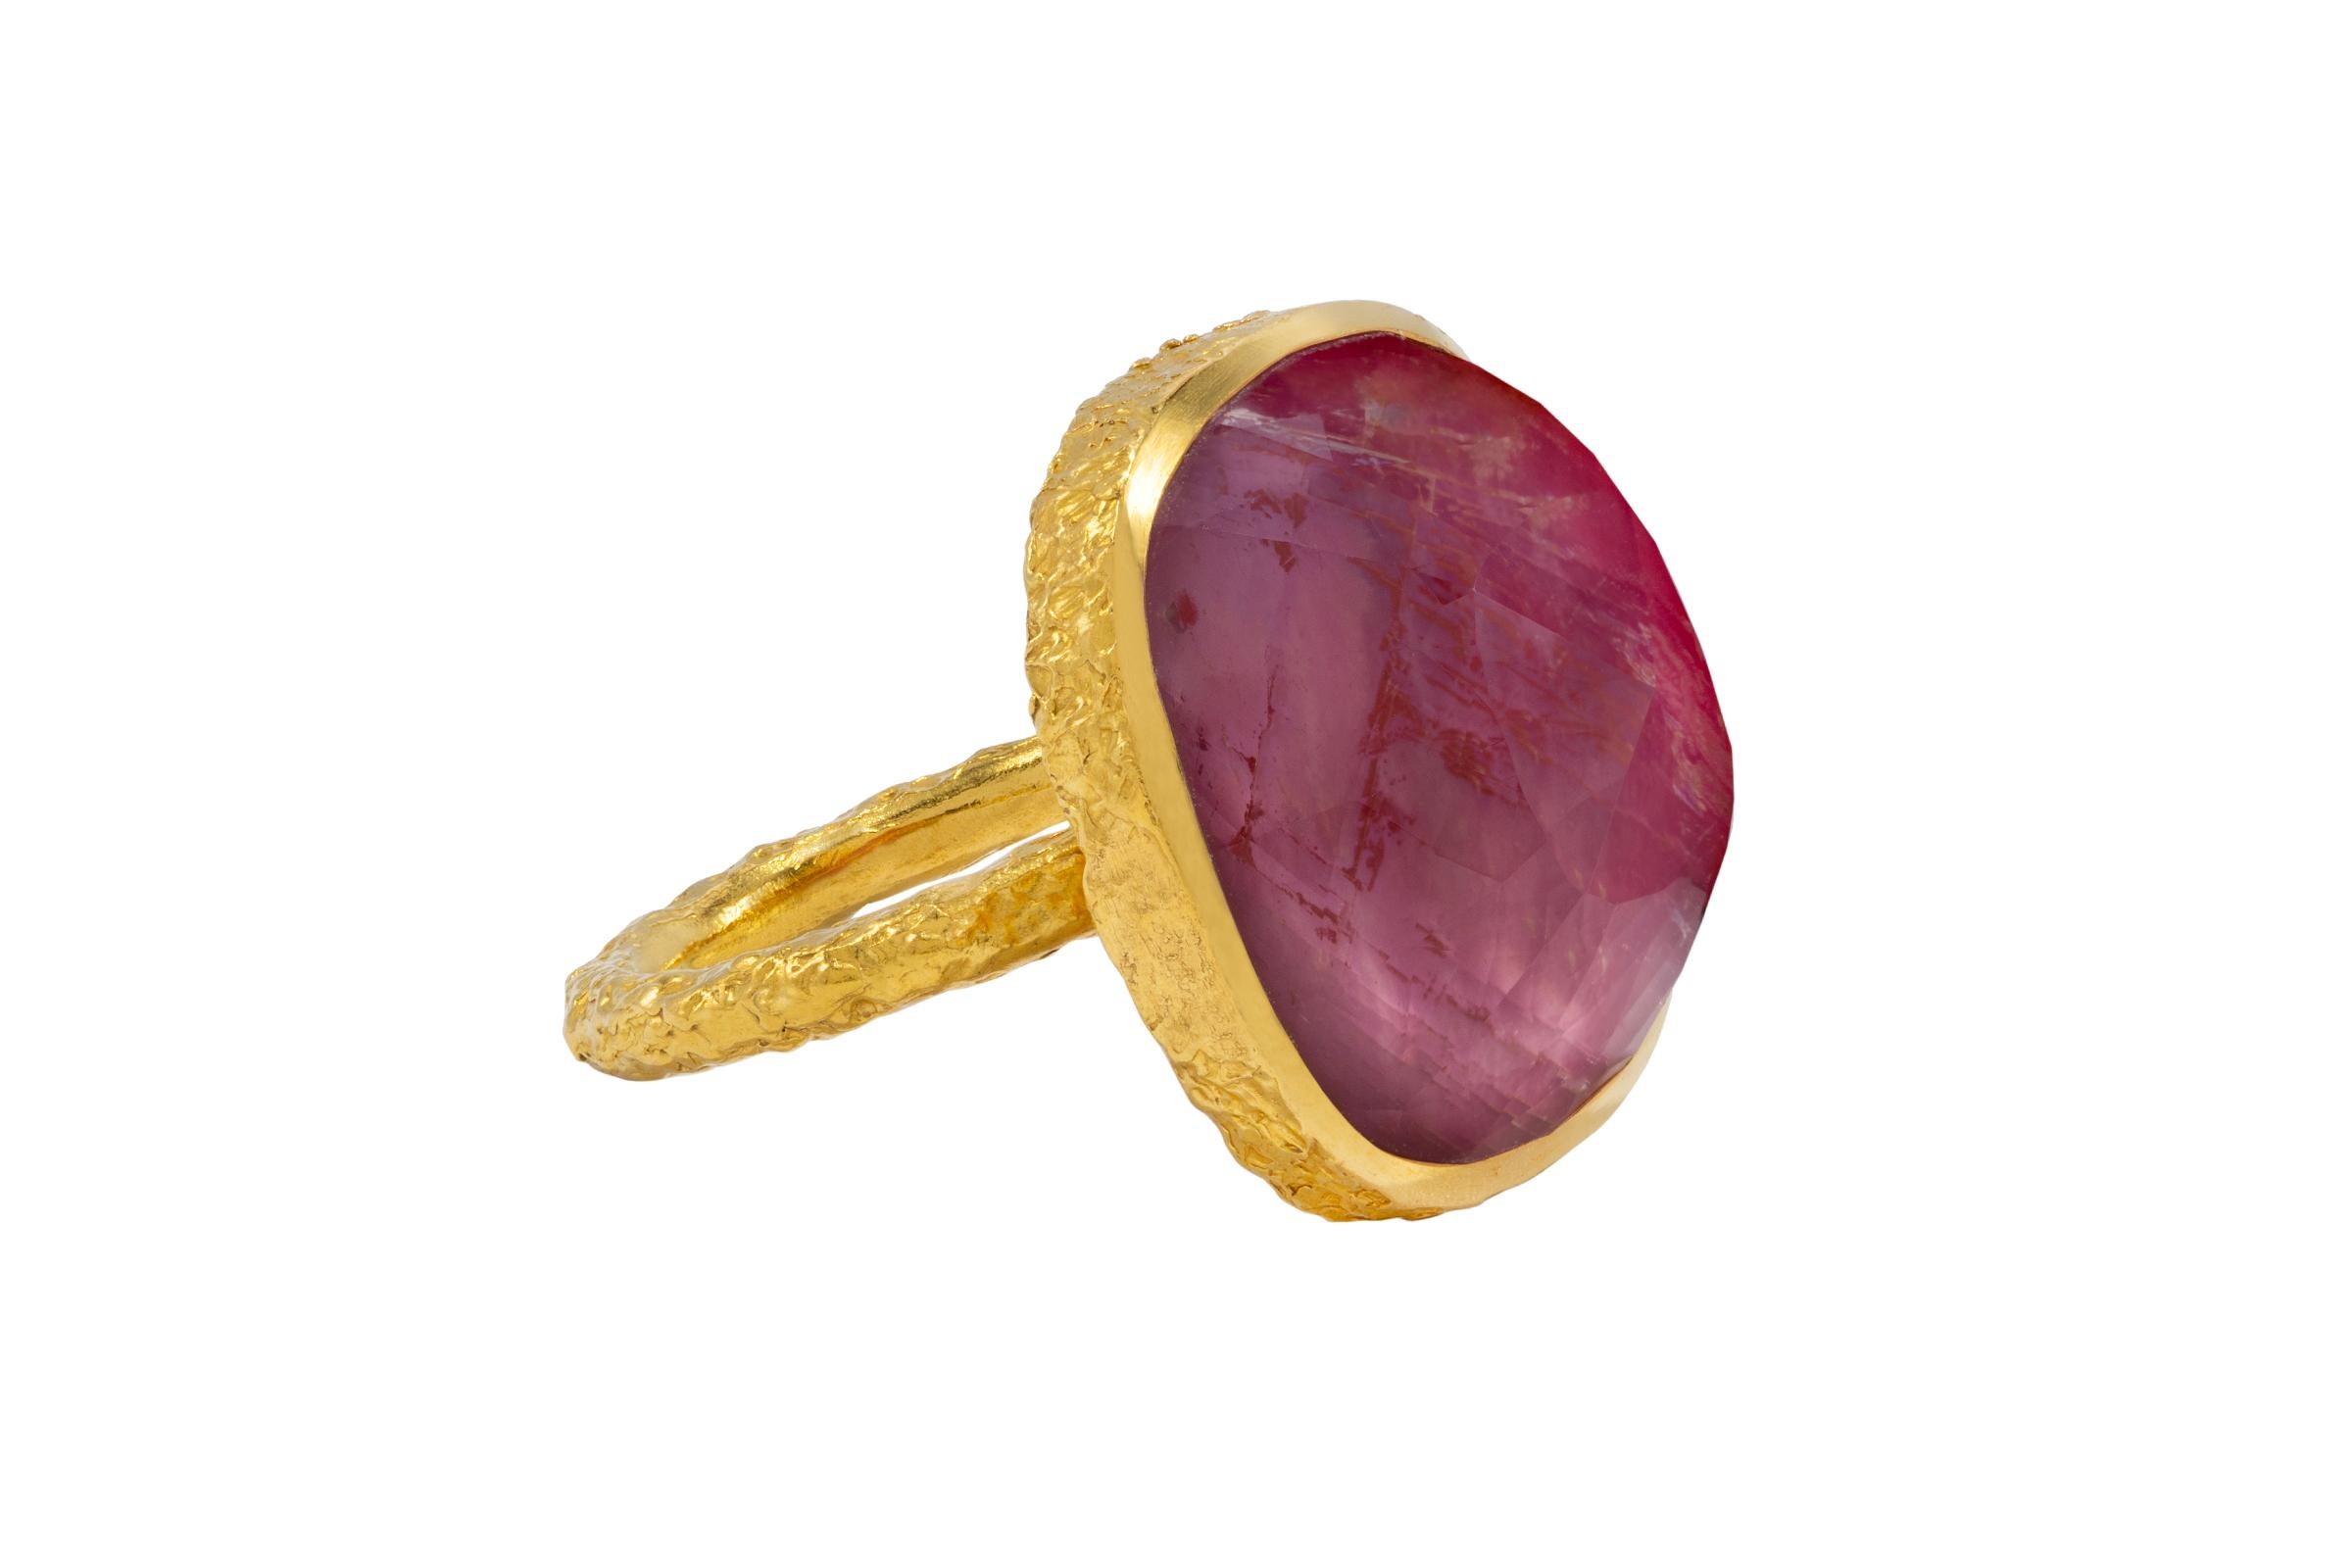 Mystical Red Corundum and Crystal ring is handmade in 22k gold and features Tagili Designs signature finish. The Crystal lays a top the Corundum and gives it magical depth and beauty and is part of the Celestial Collection. This collection captures